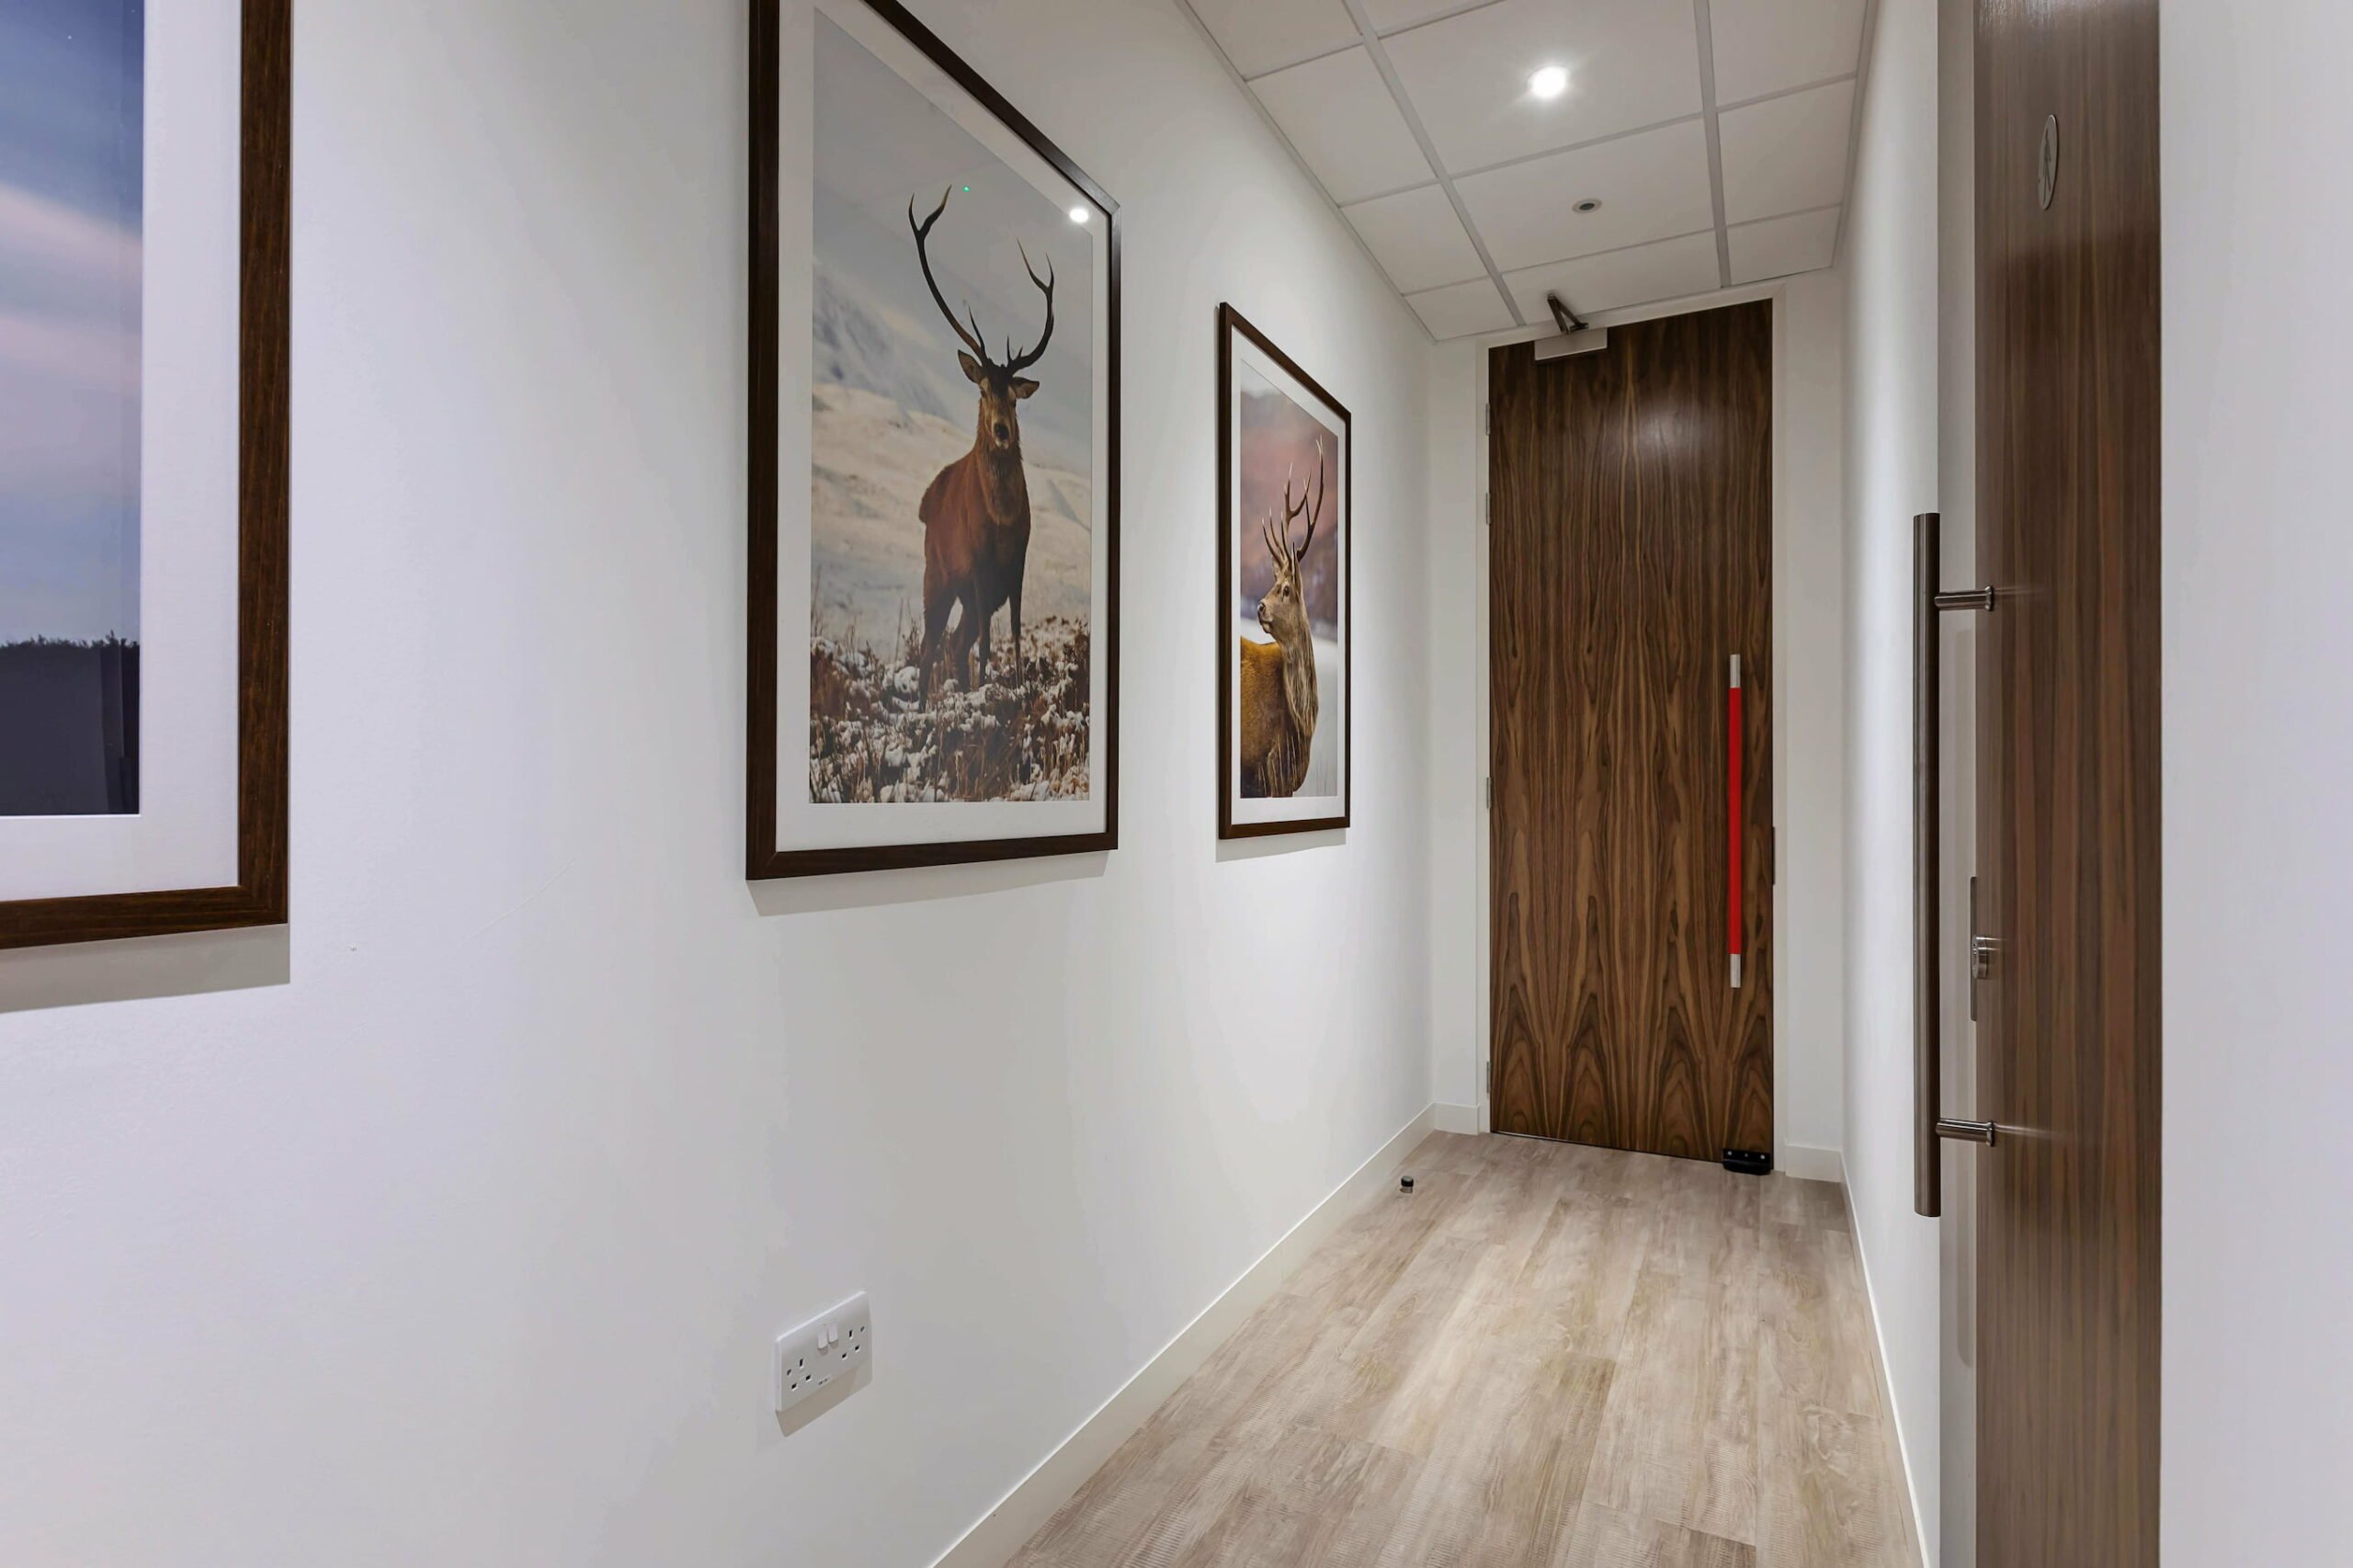 A bright hallway with two doors and deer paintings on the walls.